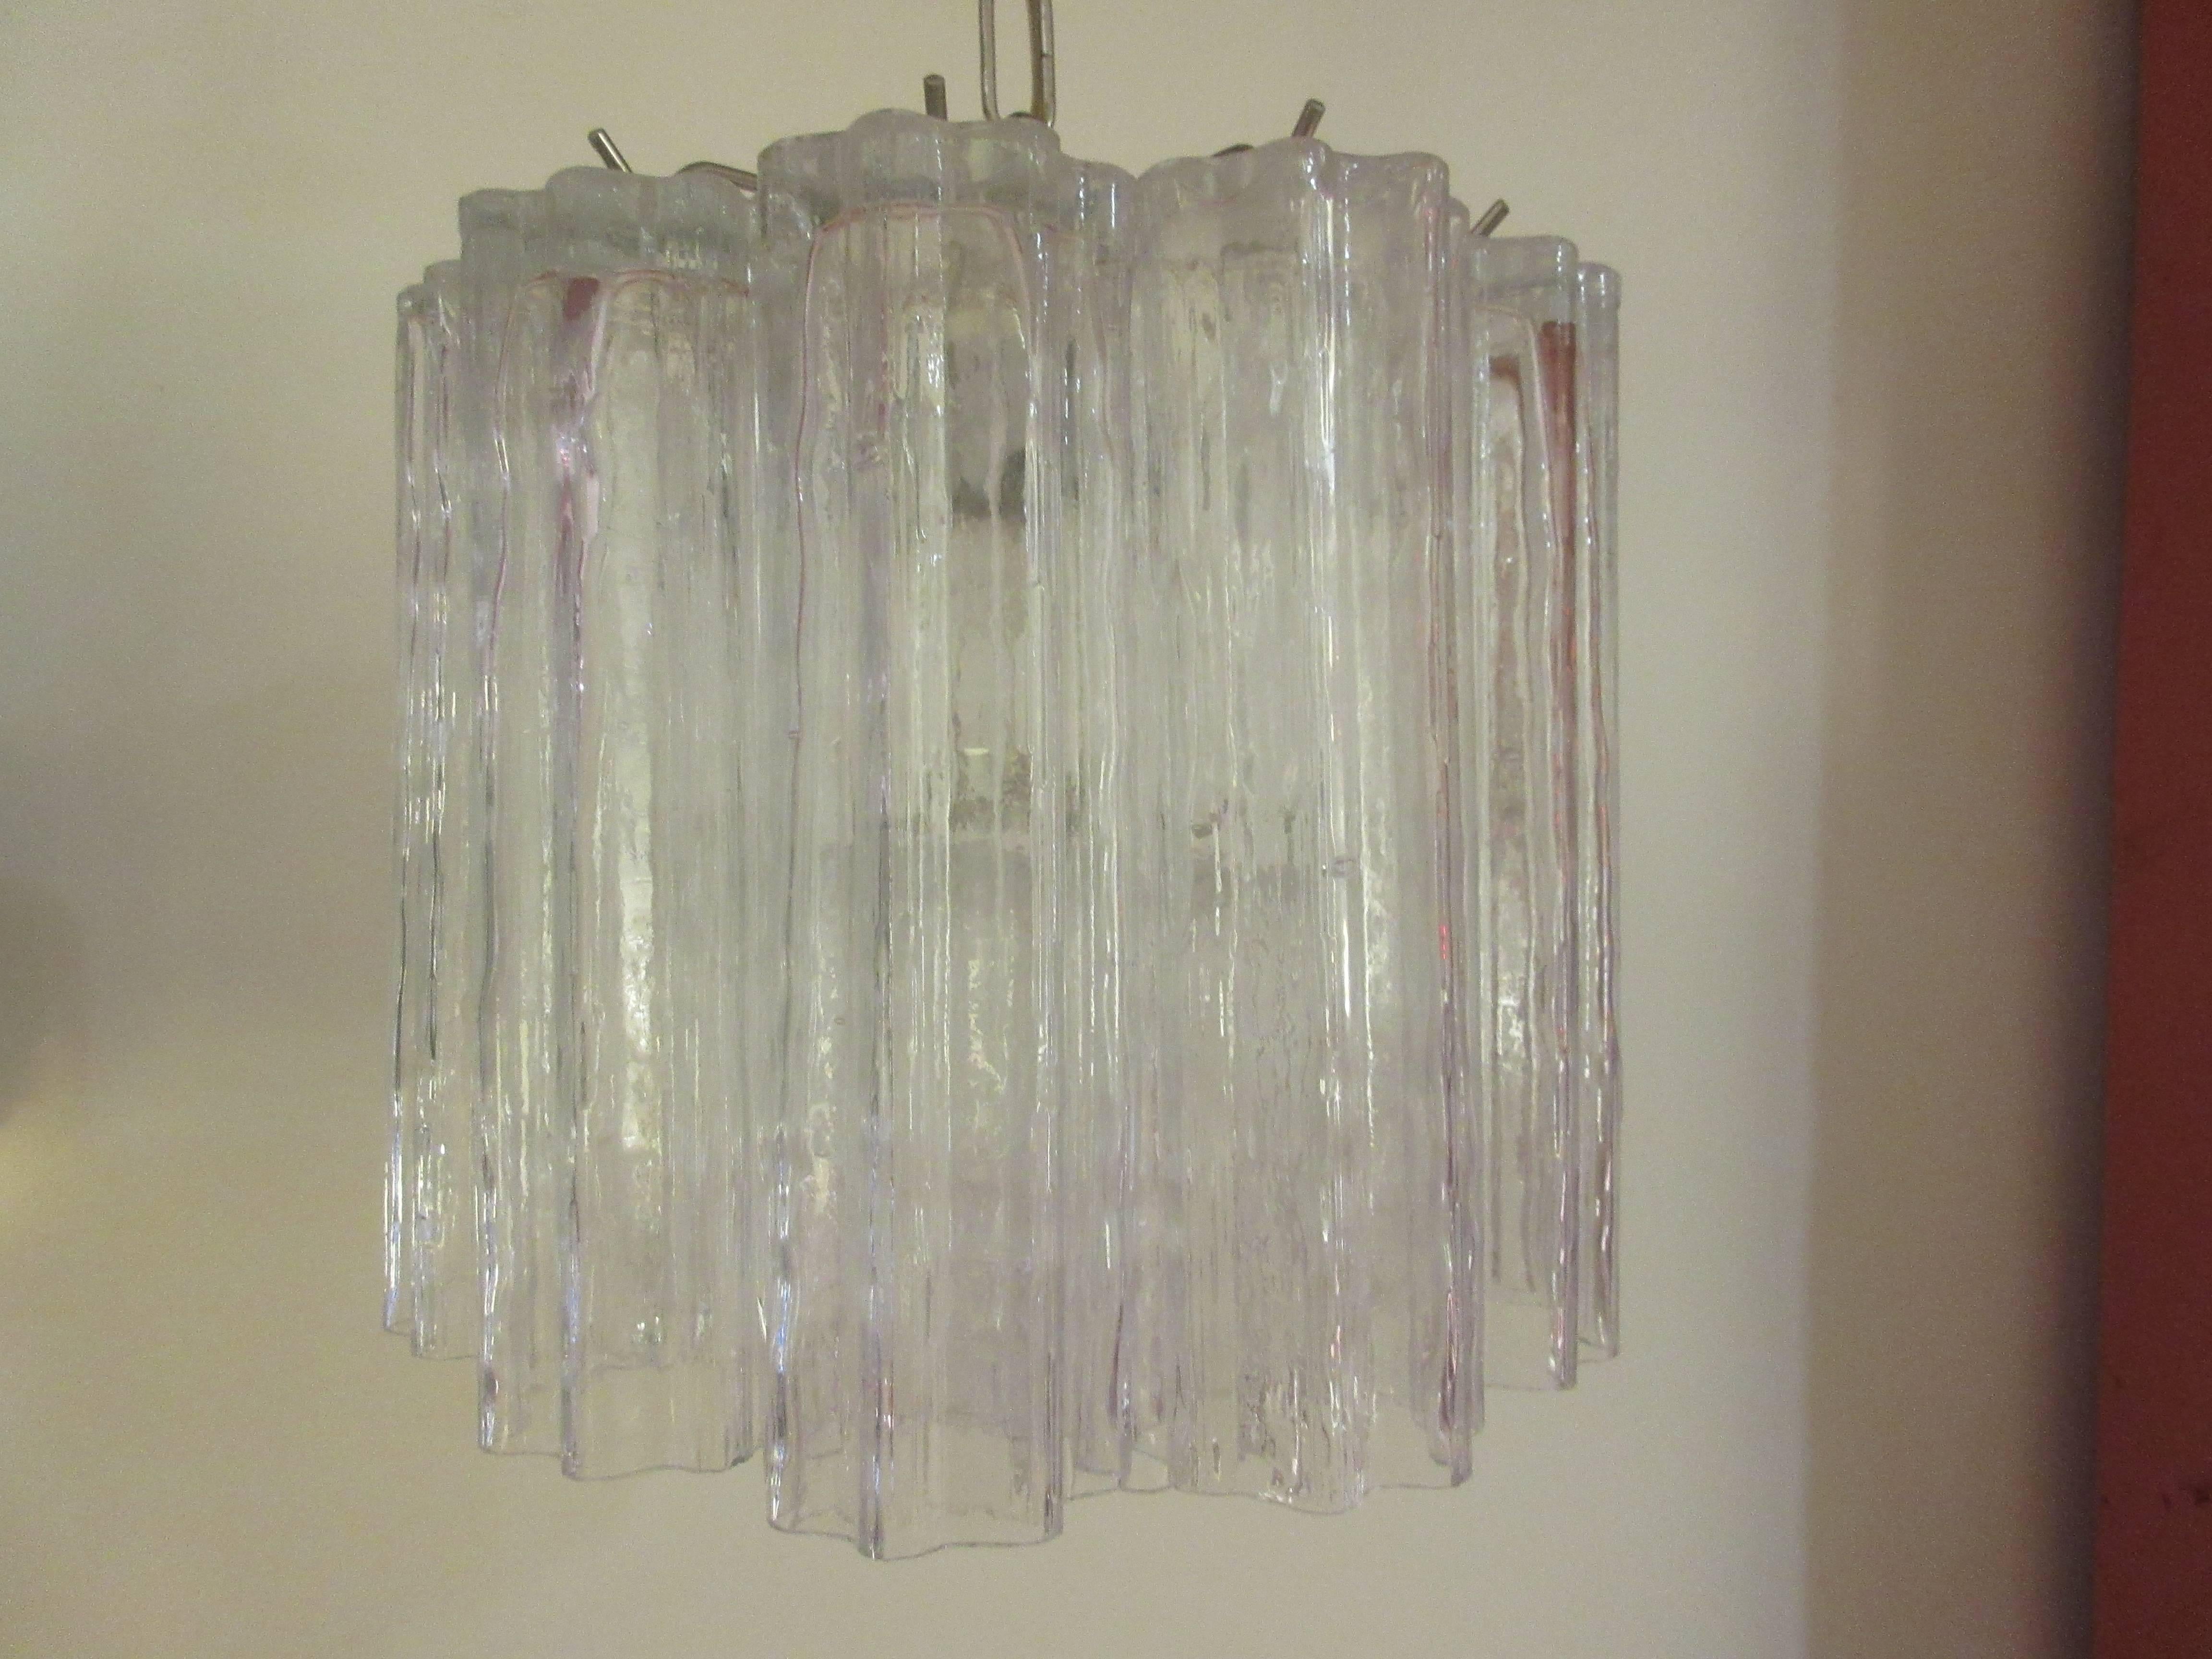 Venini chandelier with chrome accents and 13 of the large open glass shades suspended in two levels. Measures: Each crystal is 10 inches long and 3 inches in diameter. The texture of the glass provides a rough finish which reflects the light source